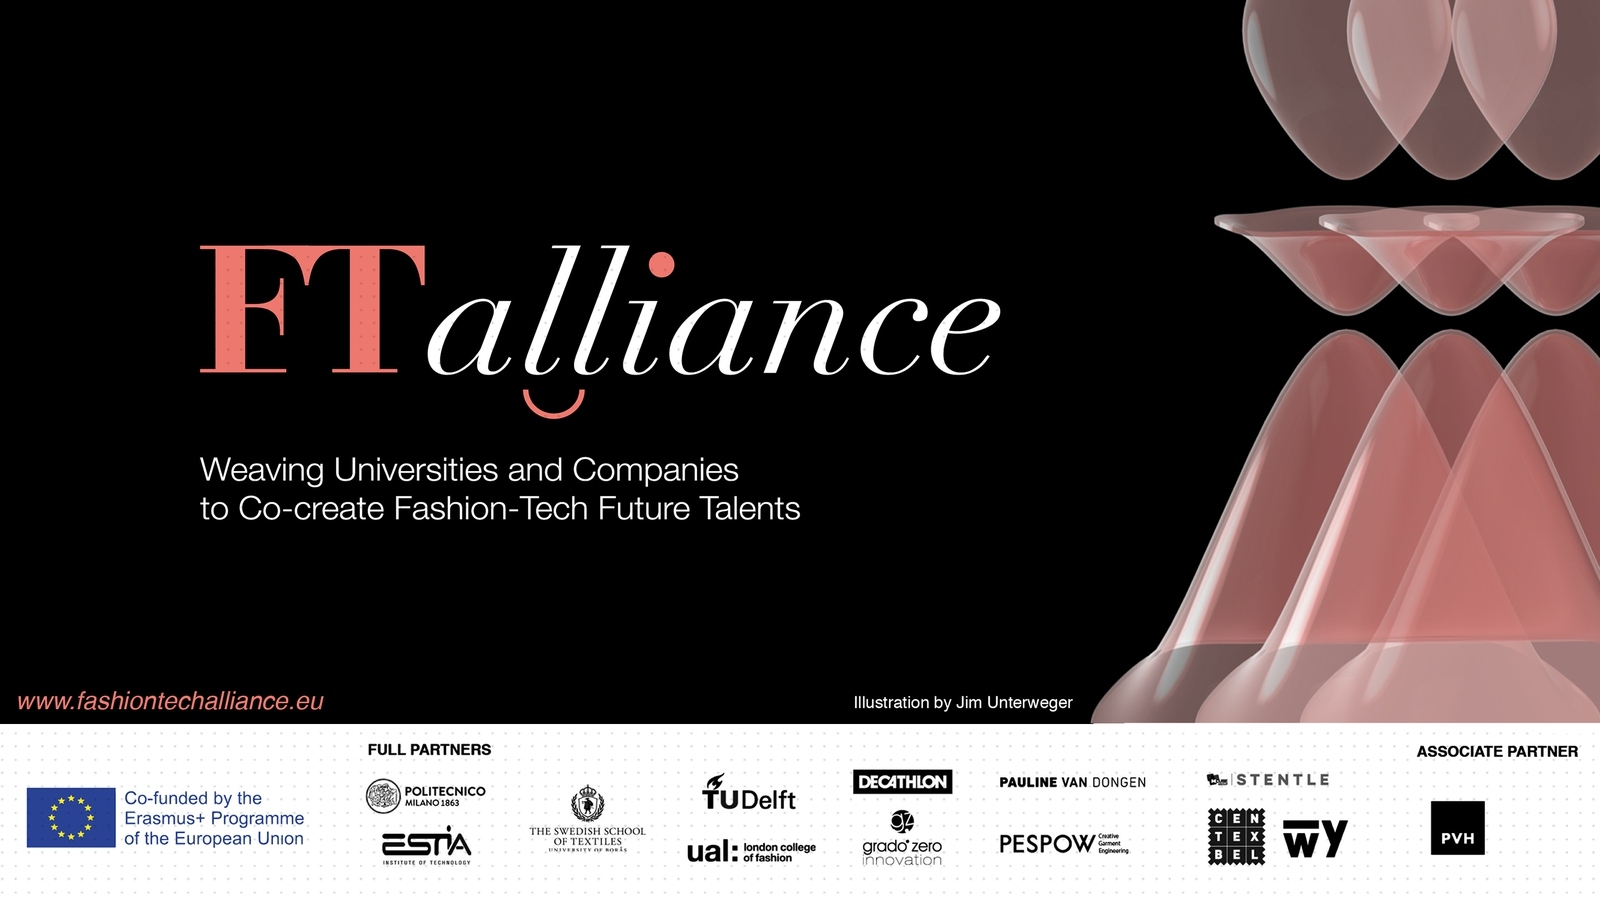 Weaving Universities and Companies to Co-create Fashion-Tech Future Talents Image